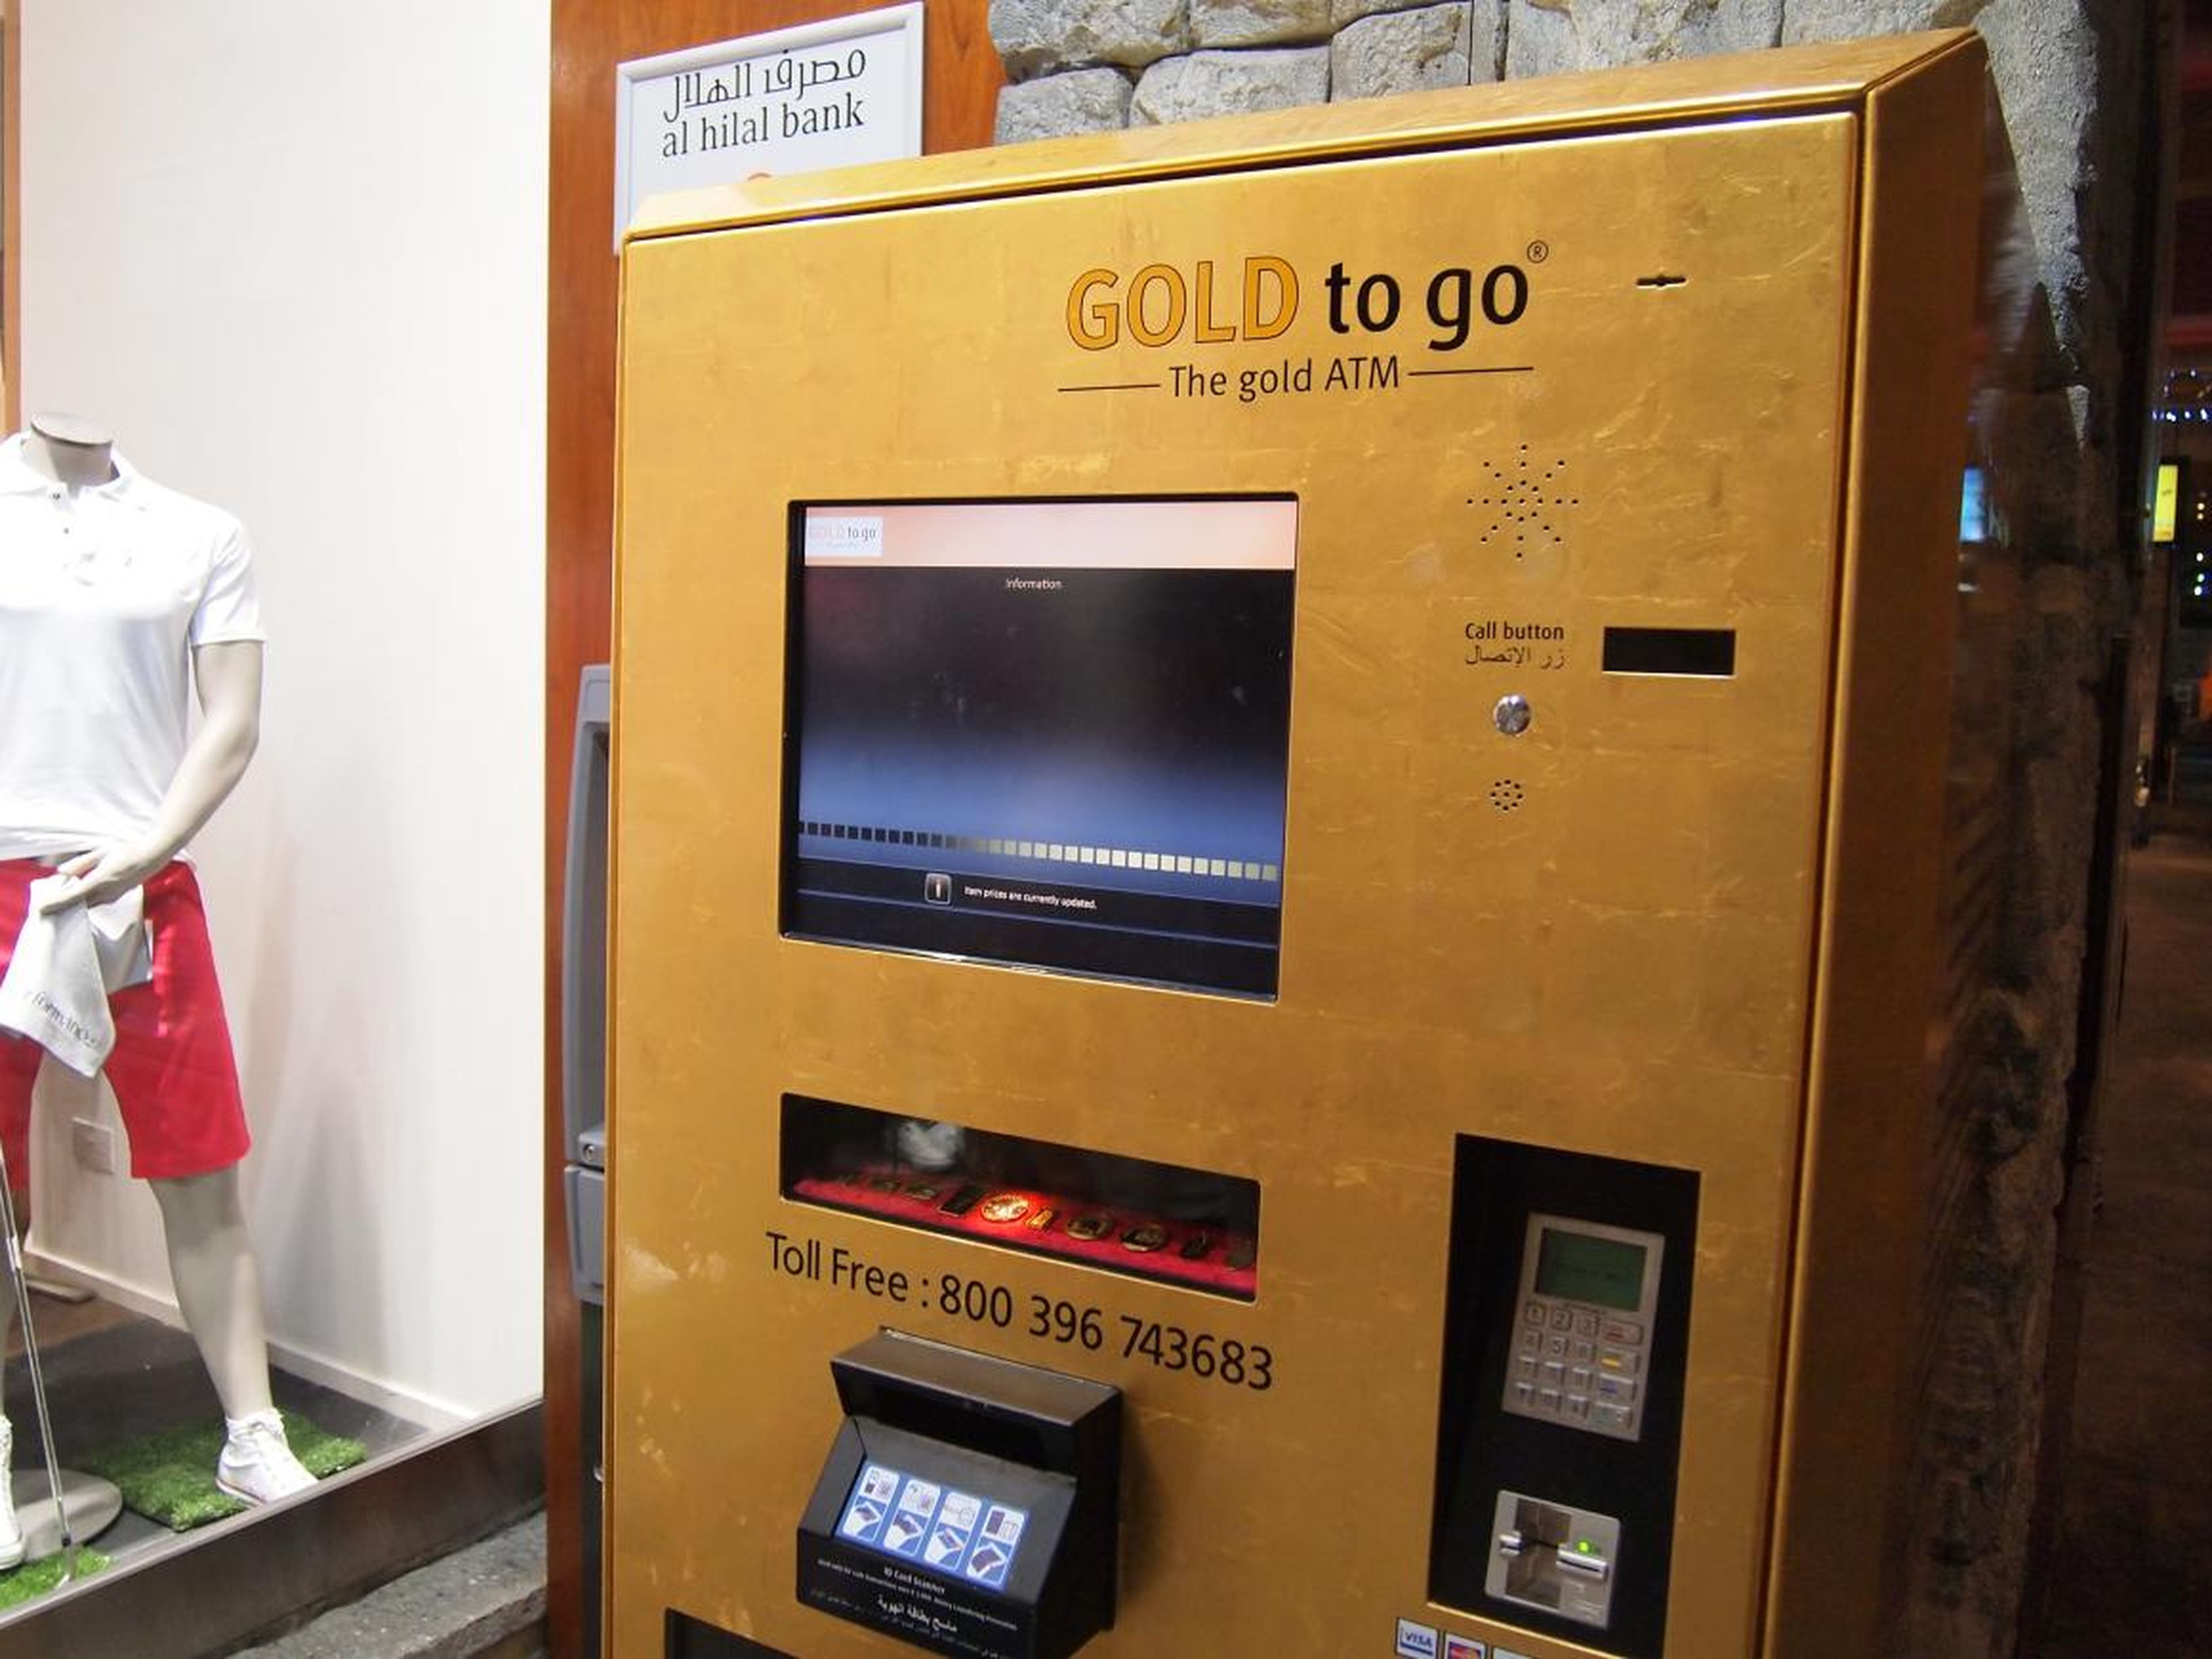 The machine offers gold coins from Canada.